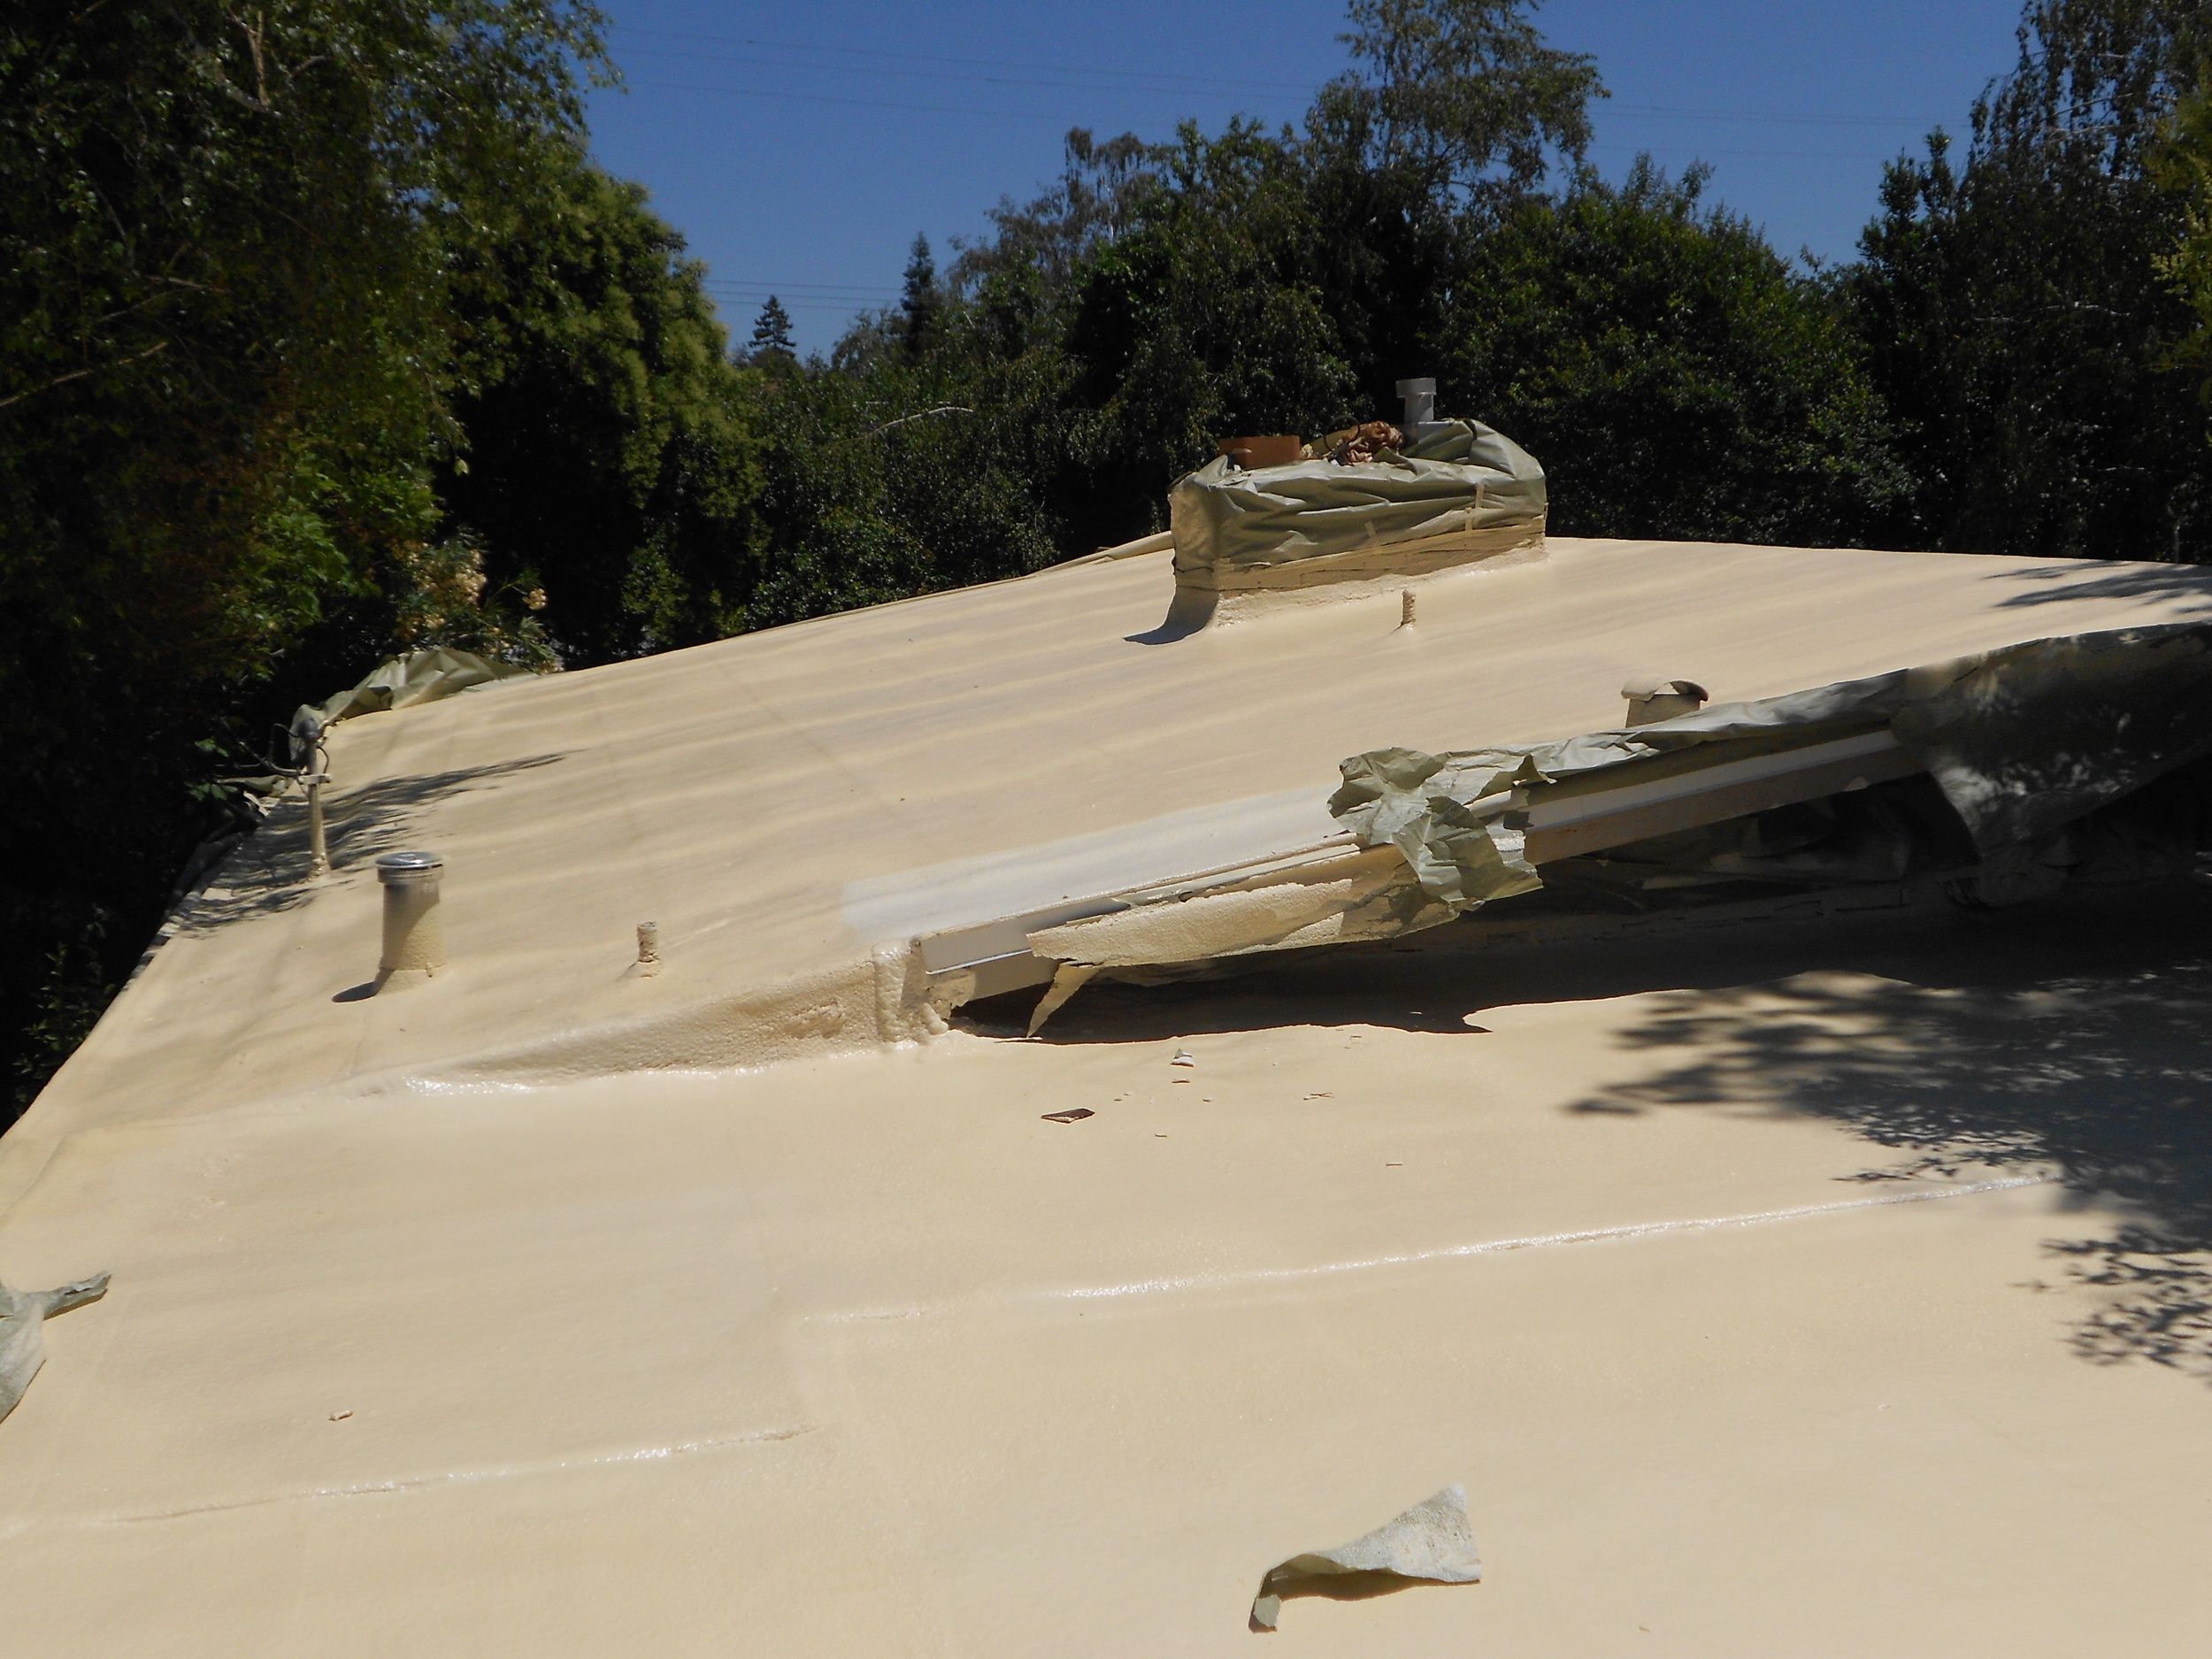 Completed Foam & Coatings Project by Ved's Roofing of Yuba City, CA.